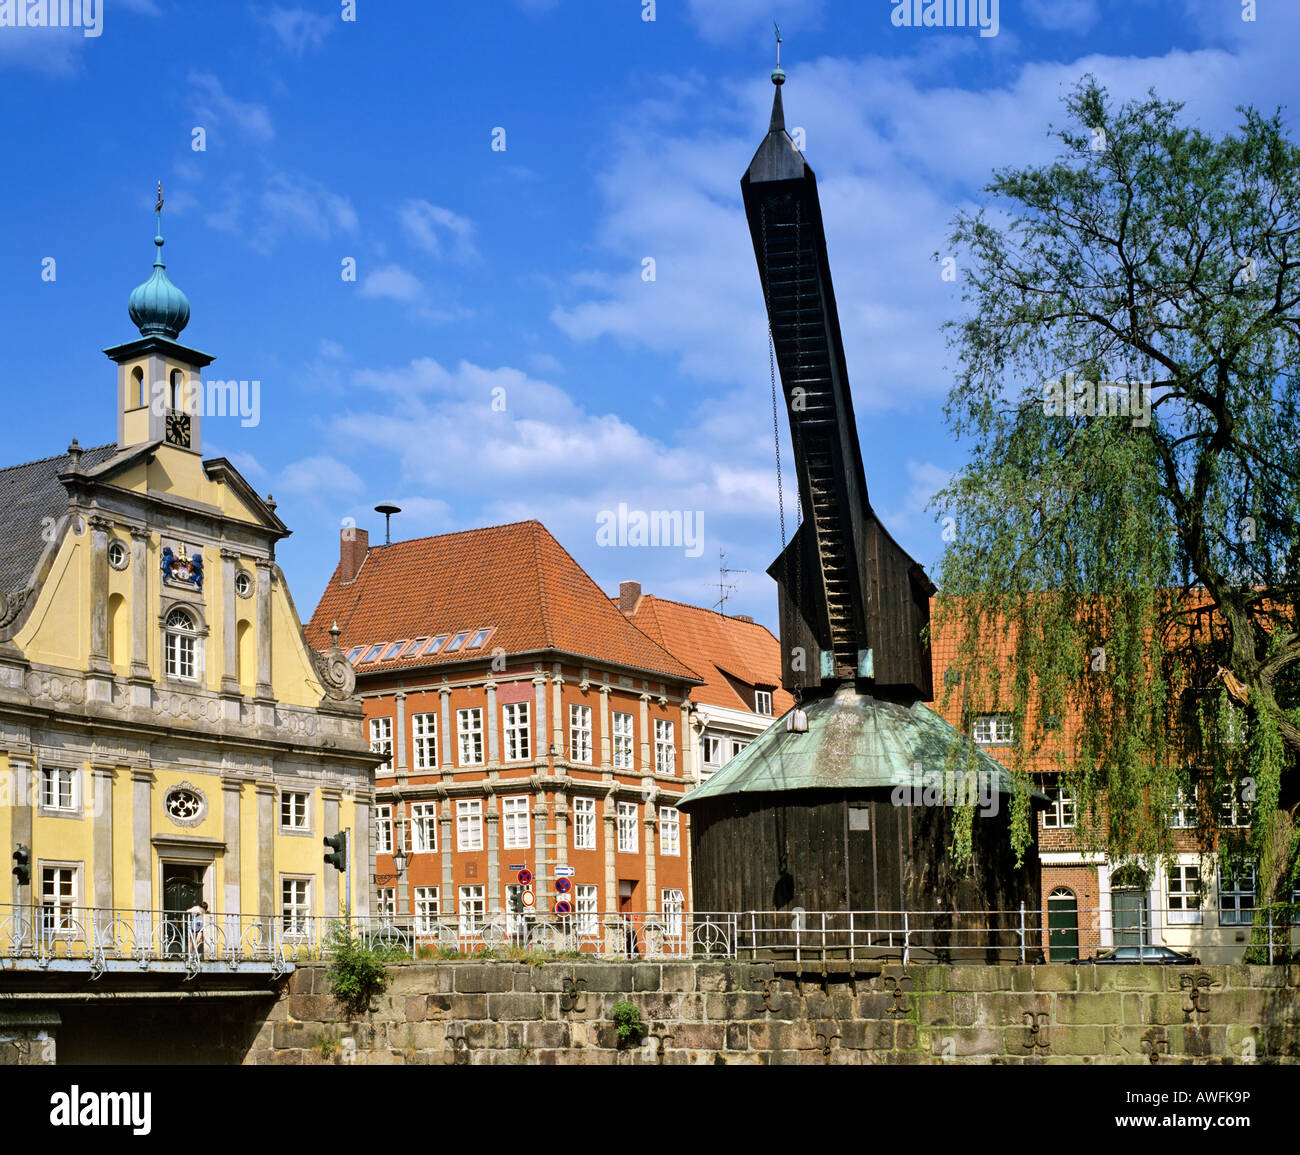 Crane and houses in the the old harbour of Lueneburg, Lower Saxony, Germany, Europe Stock Photo